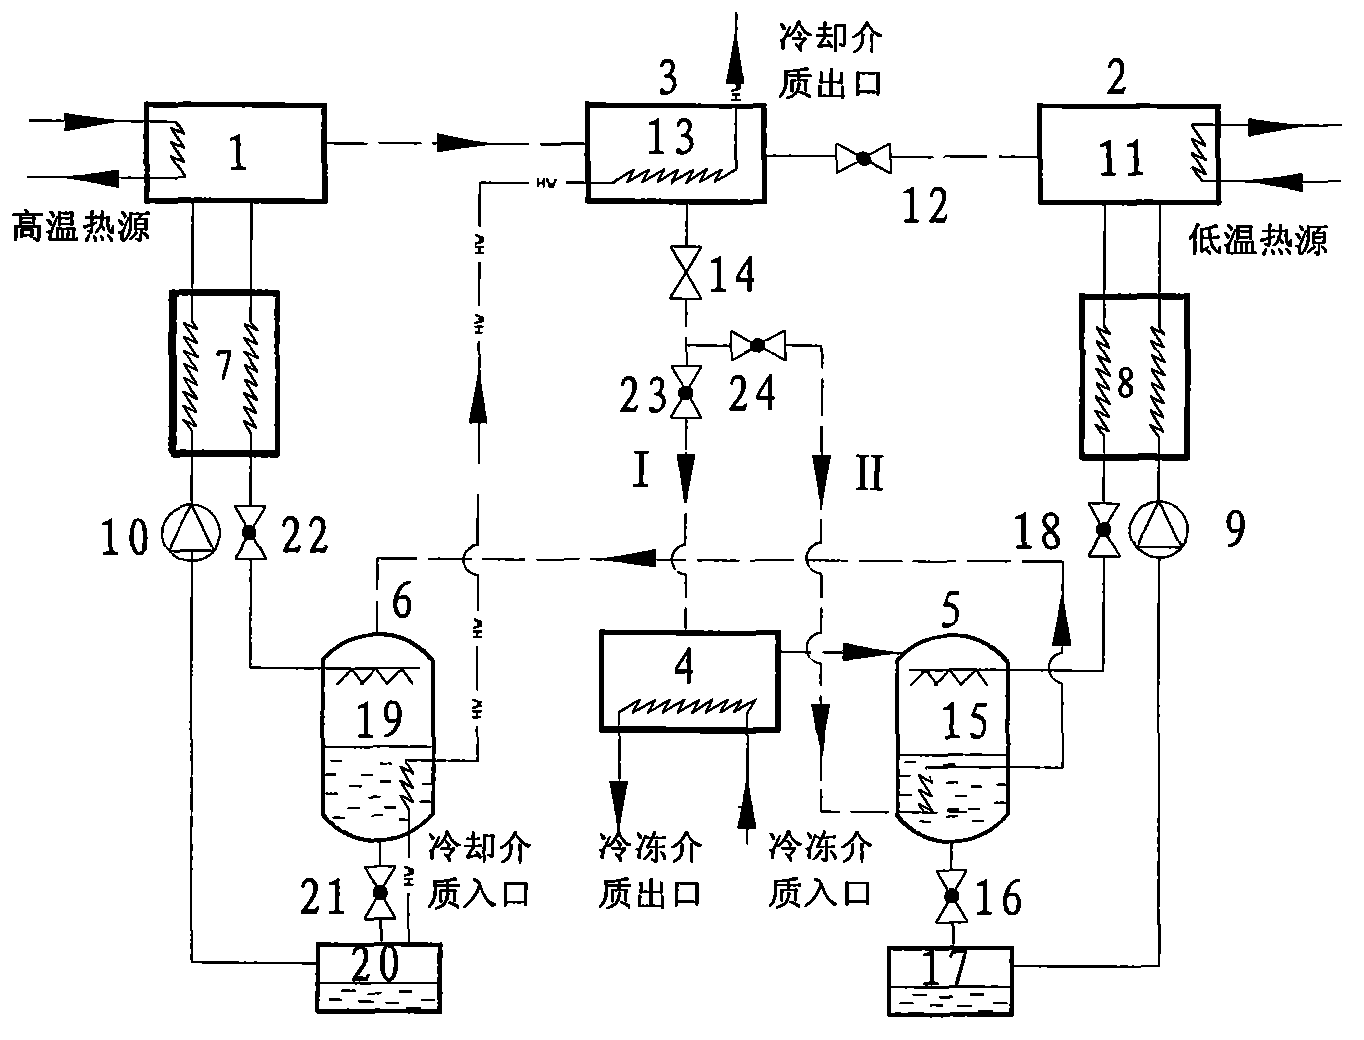 Low-grade-energy drive CO2 absorption refrigeration system